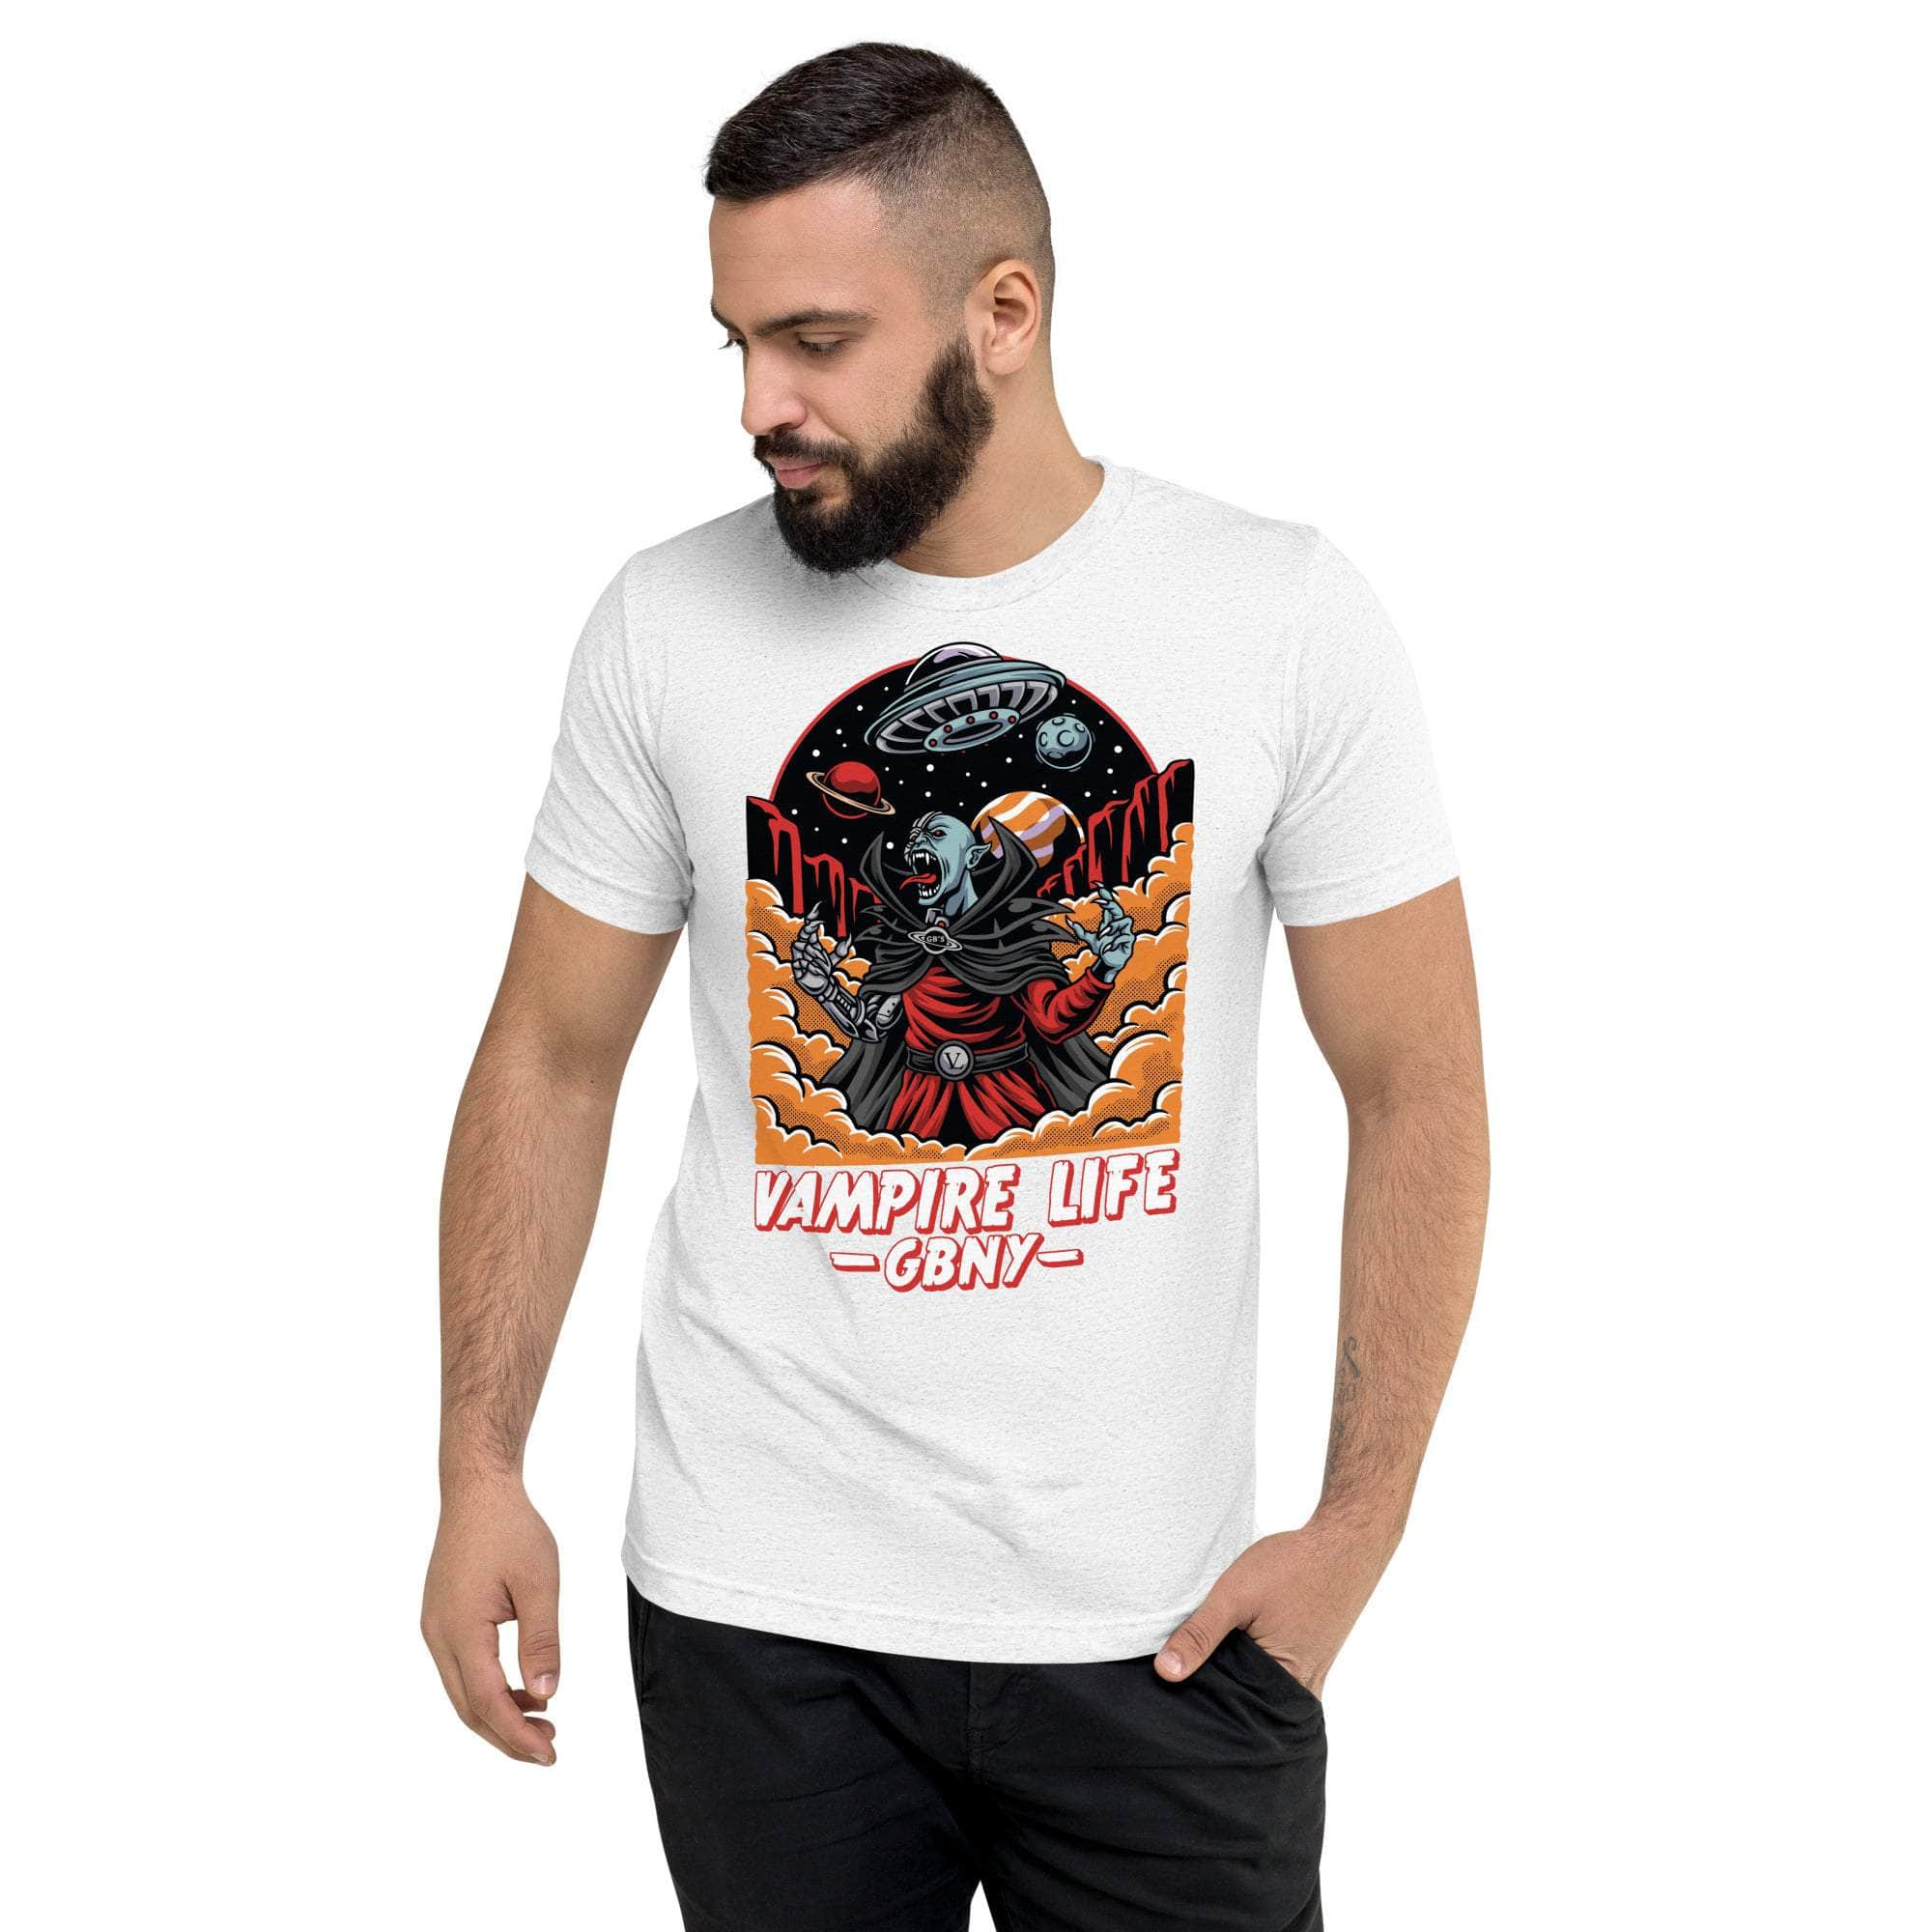 GBNY Solid White Triblend / XS Vamp Life X GBNY "Space Vampire" T-shirt - Men's 3872353_16792